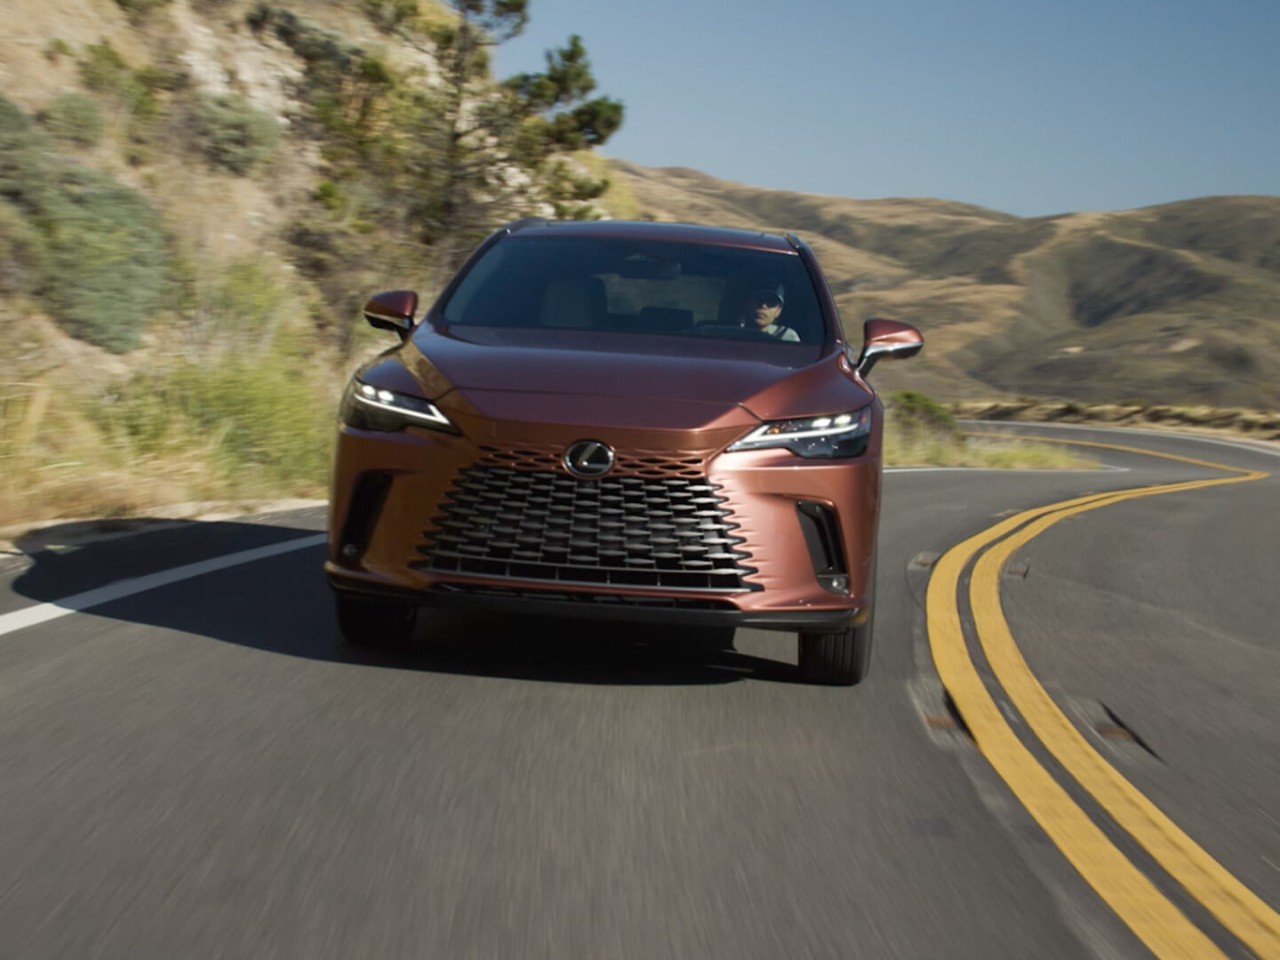 The Lexus RZ driving on a road